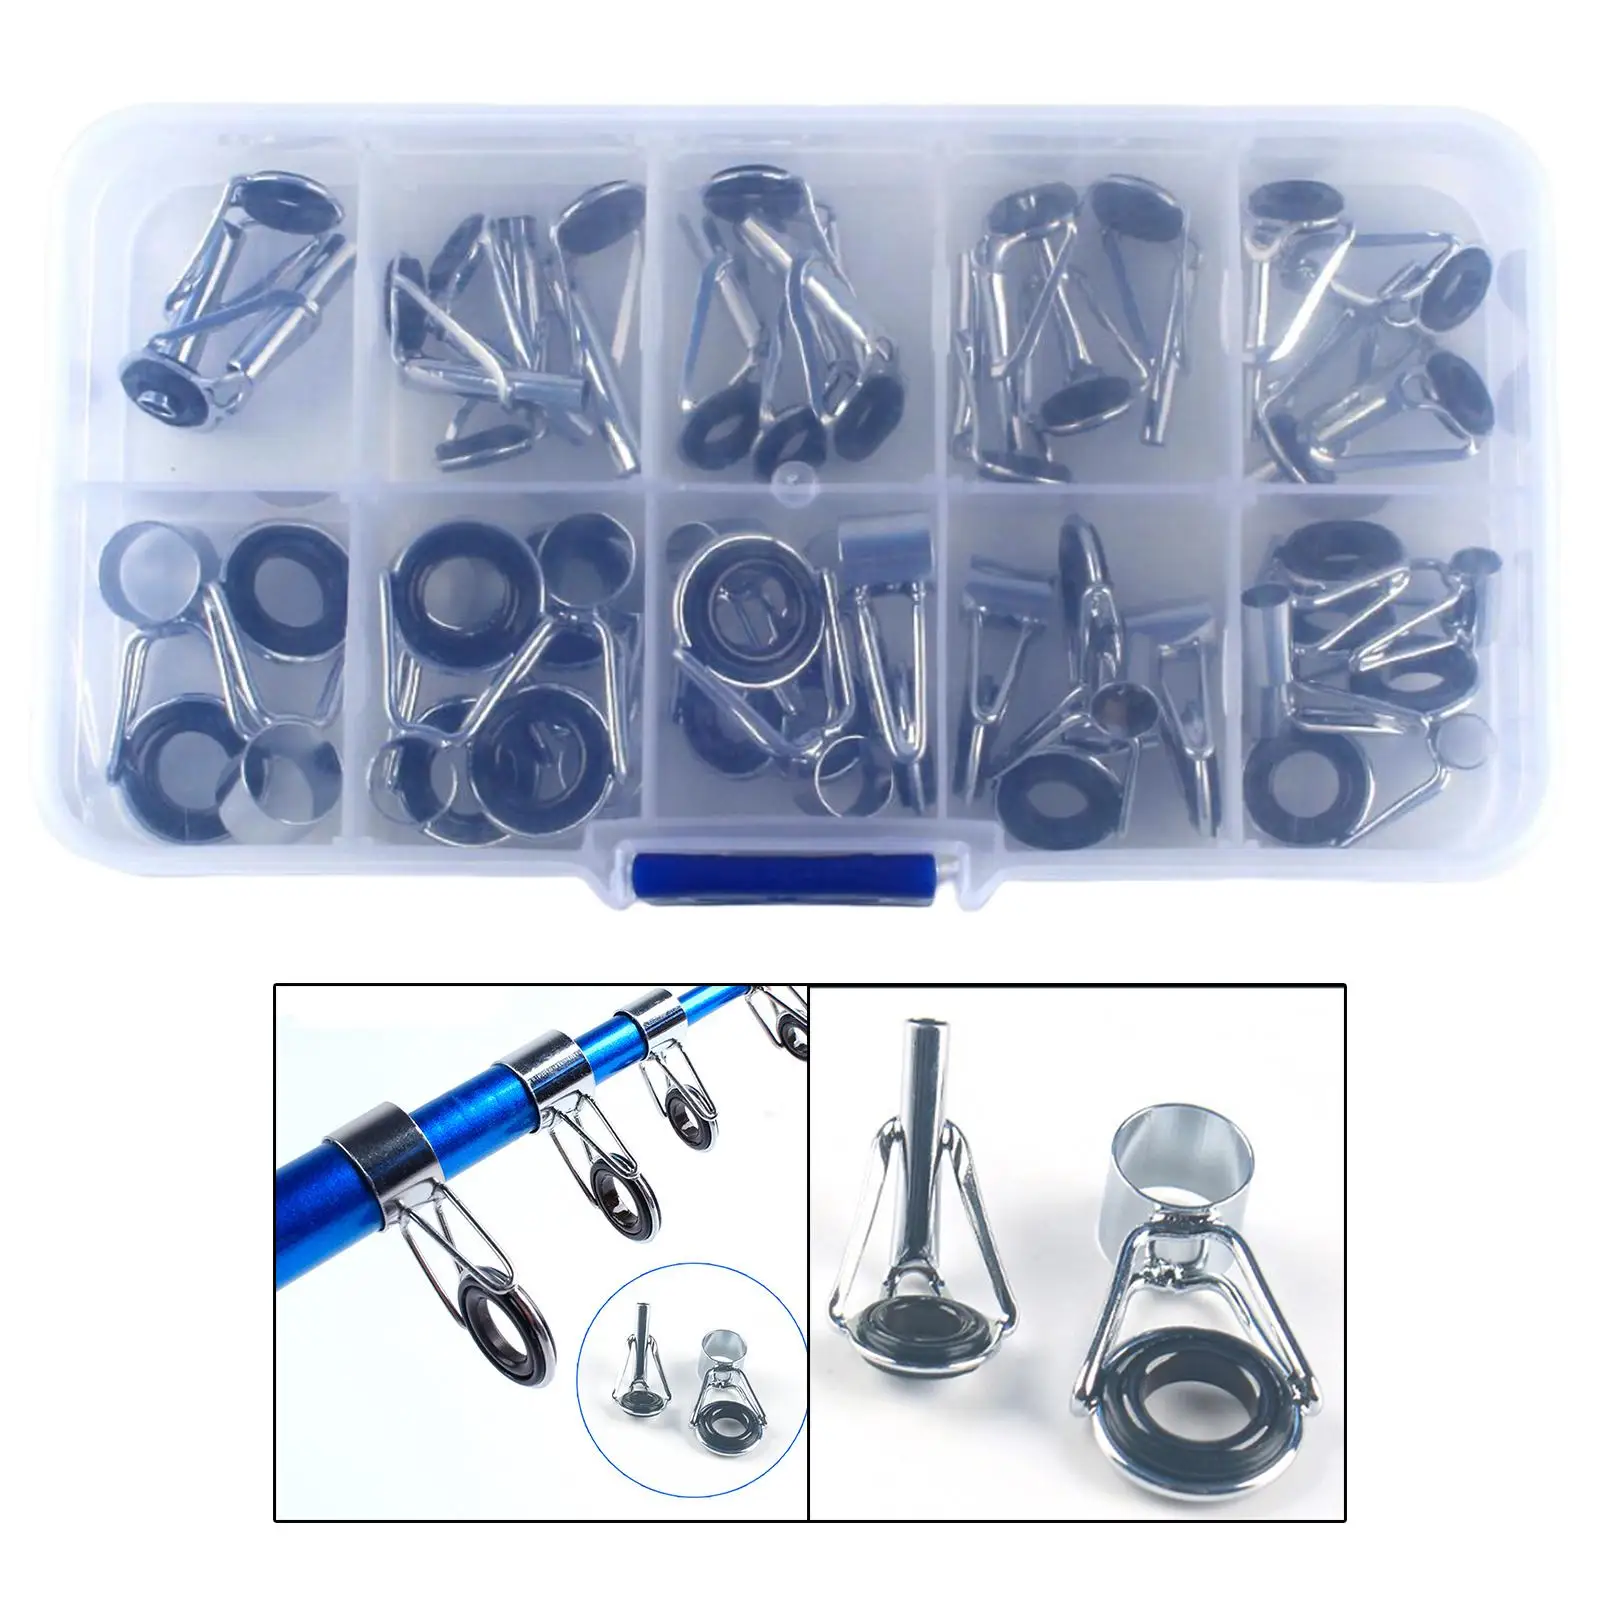 36 Pieces Fishing Rod Tips Guides Repair Kit Mixed Size in A Box Replacement